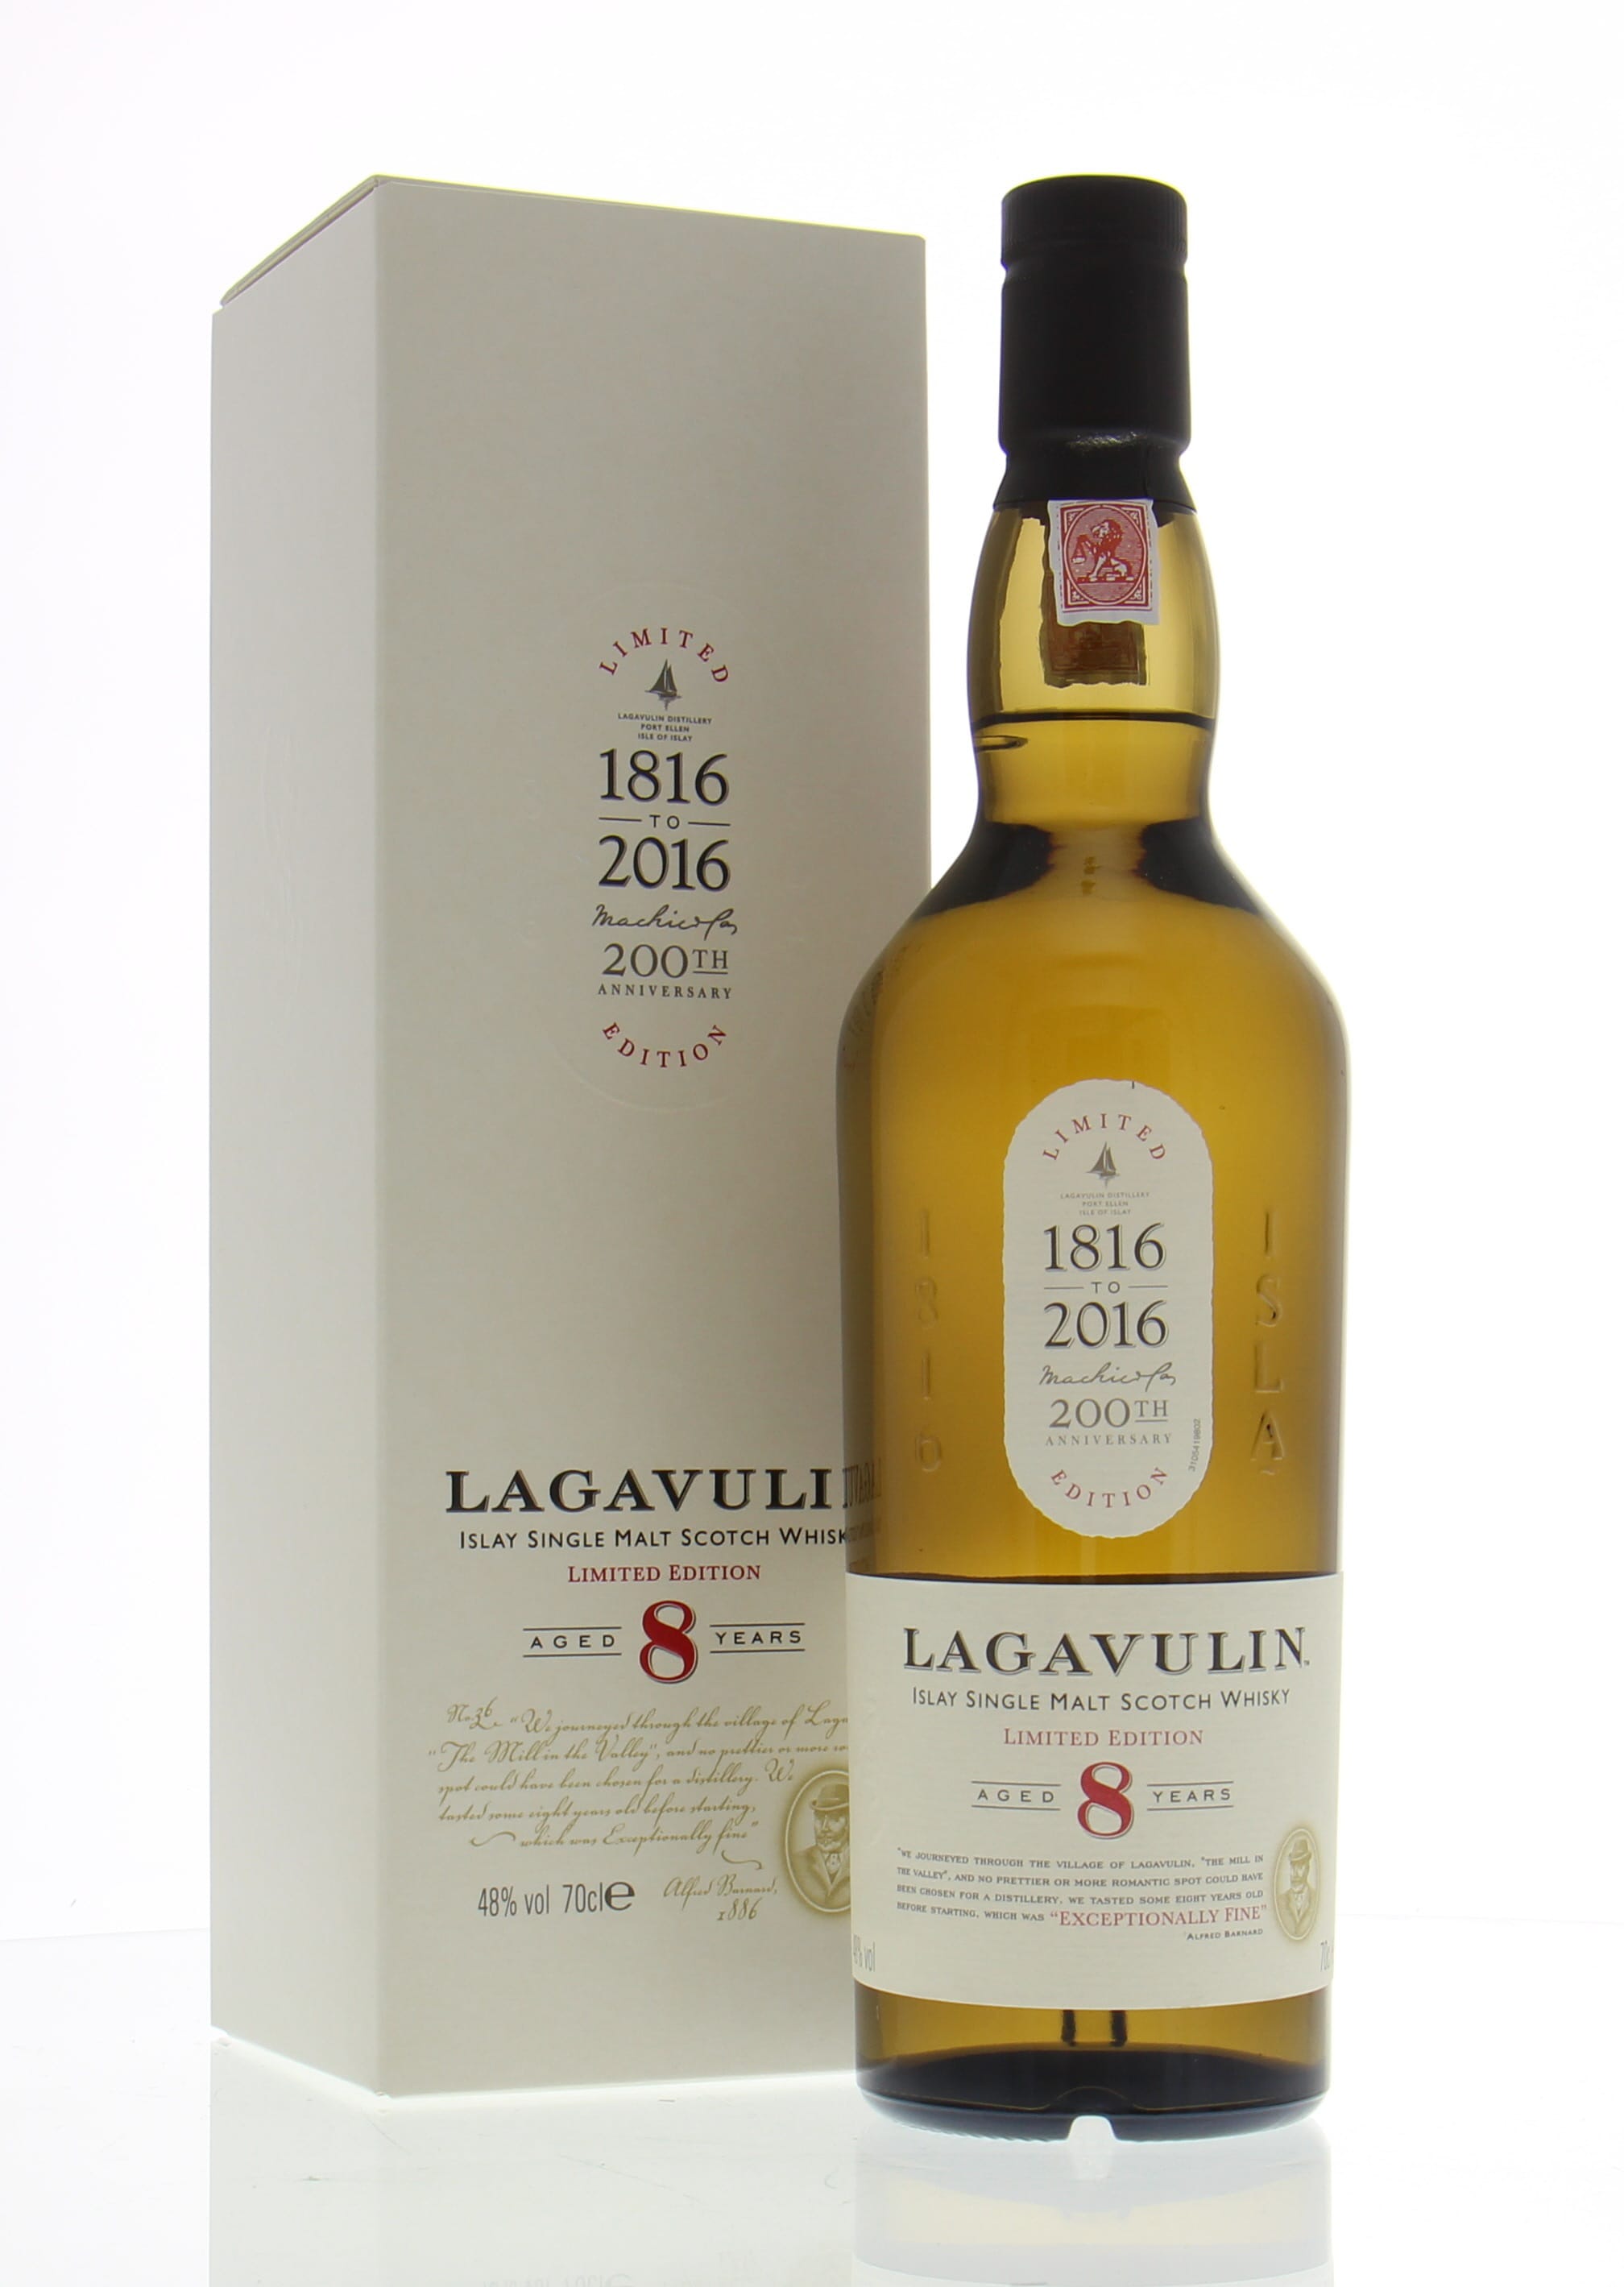 Lagavulin - 8 Years Old Limited Edition 200th Anniversary 48% NV